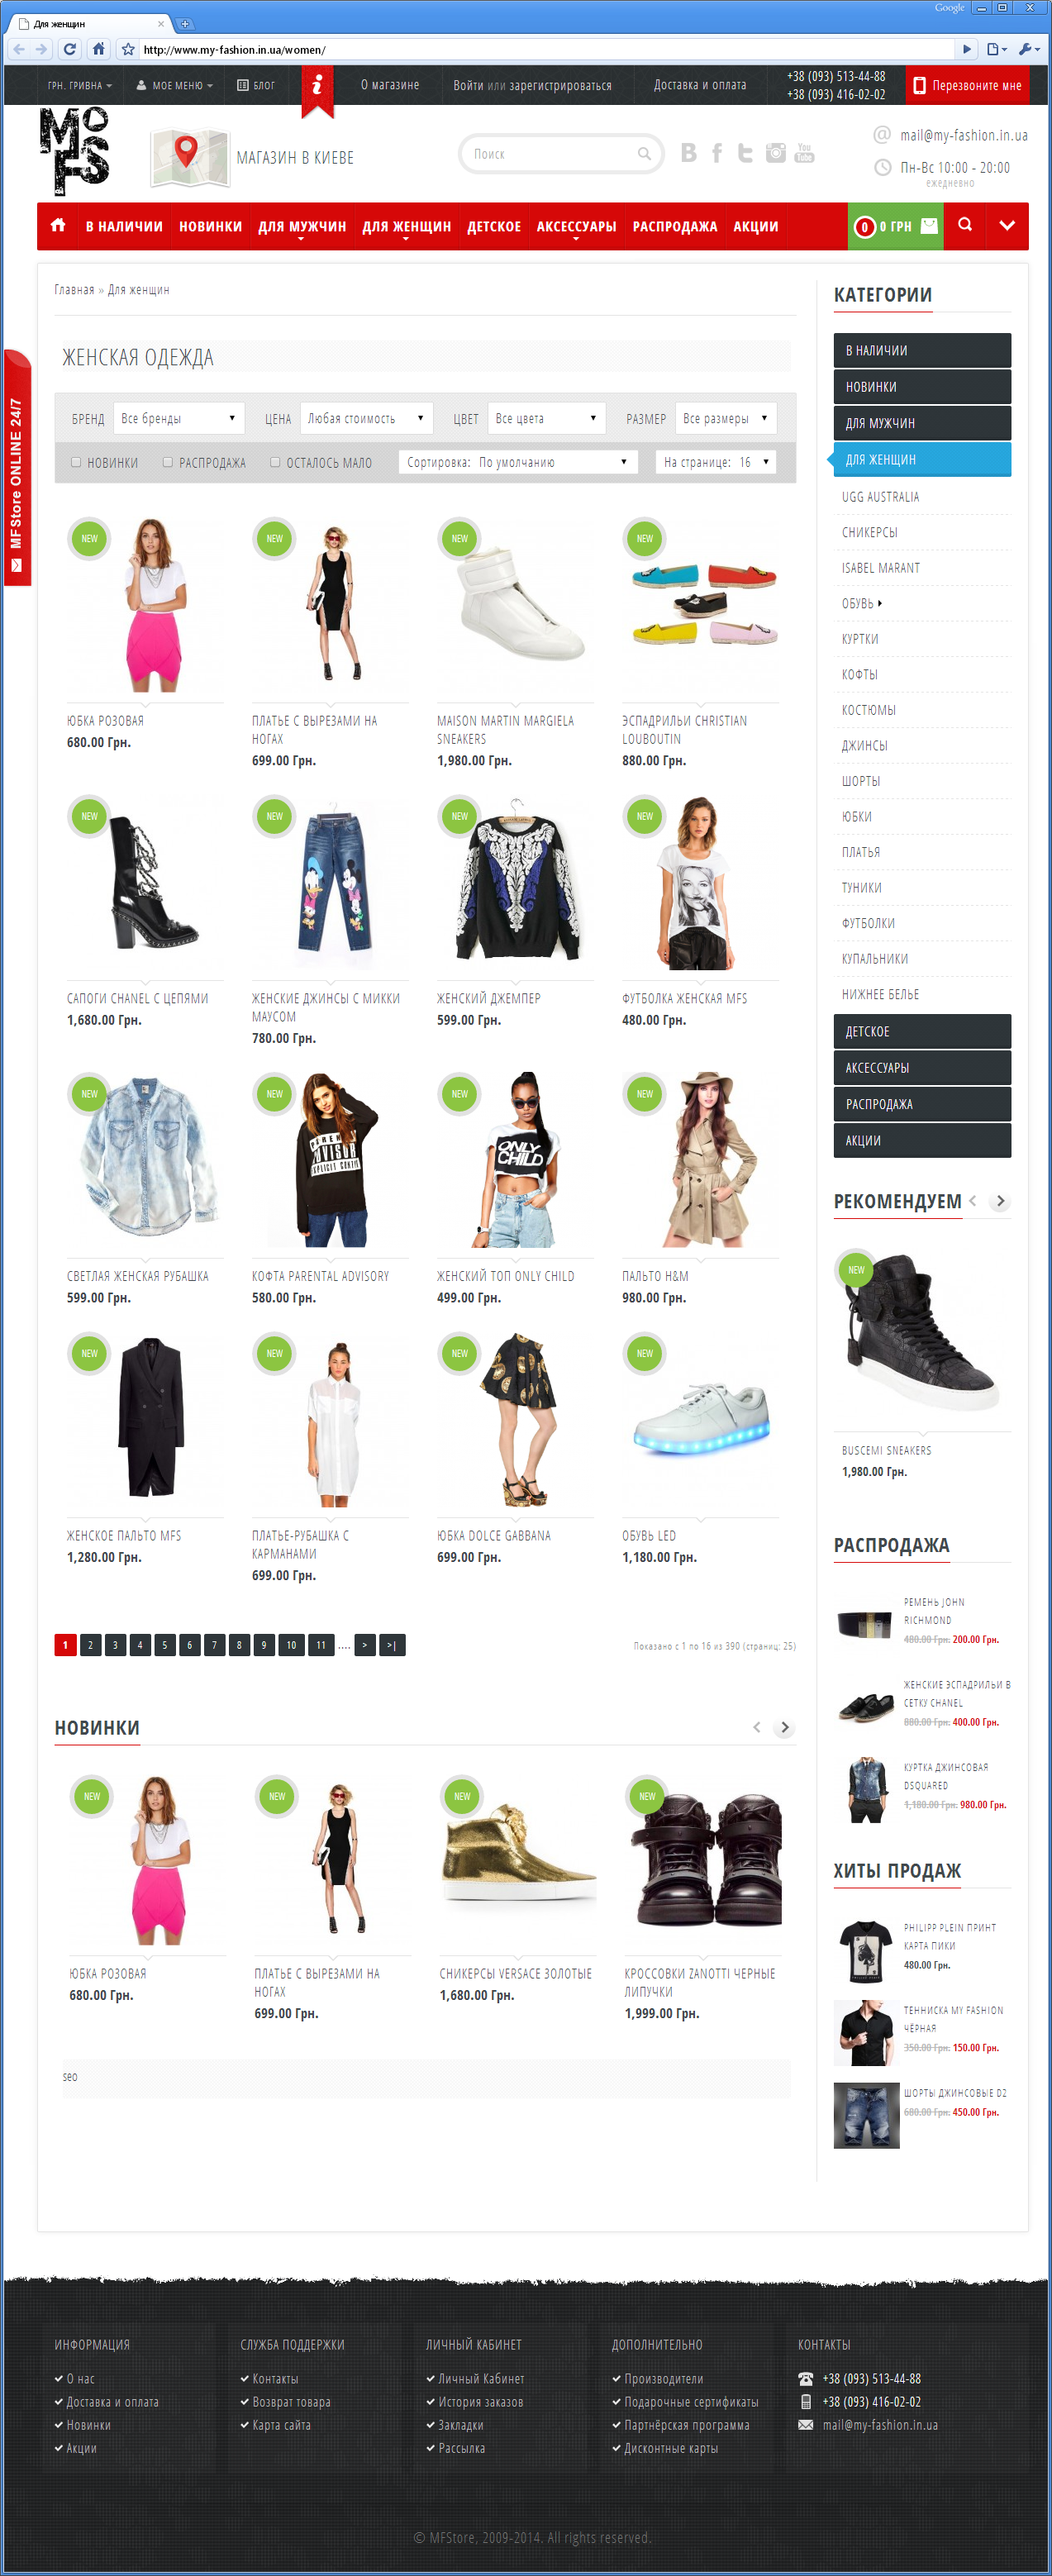 Redesign of an online store elite youth clothing | Evergreen projects 12